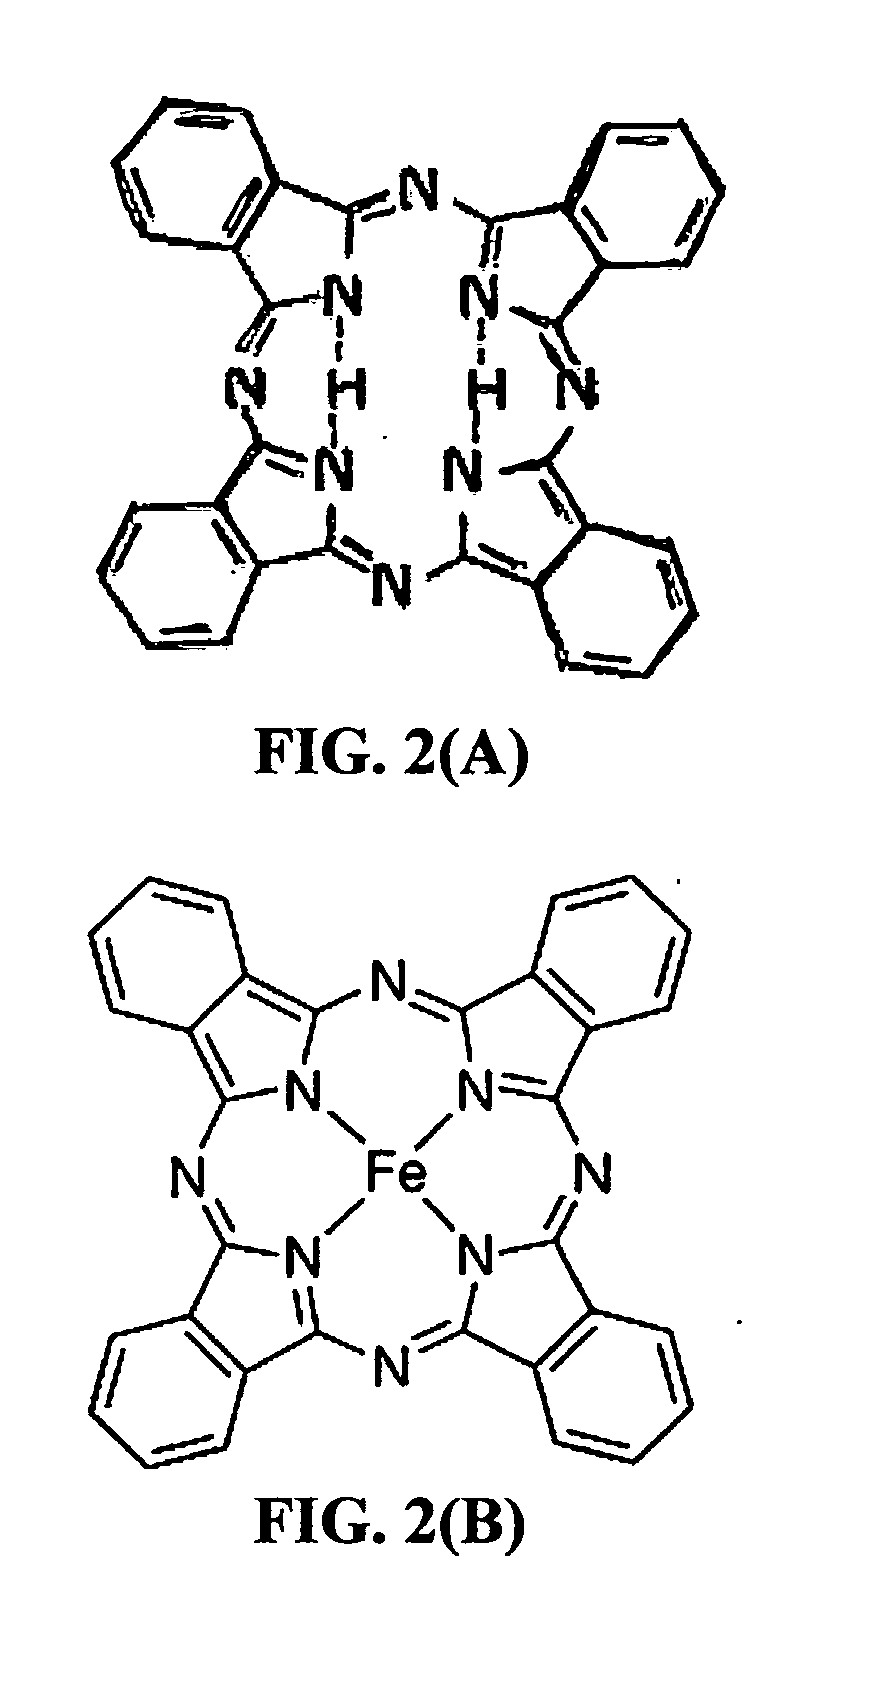 Rechargeable lithium cell having a meso-porous conductive material structure-supported phthalocyanine compound cathode